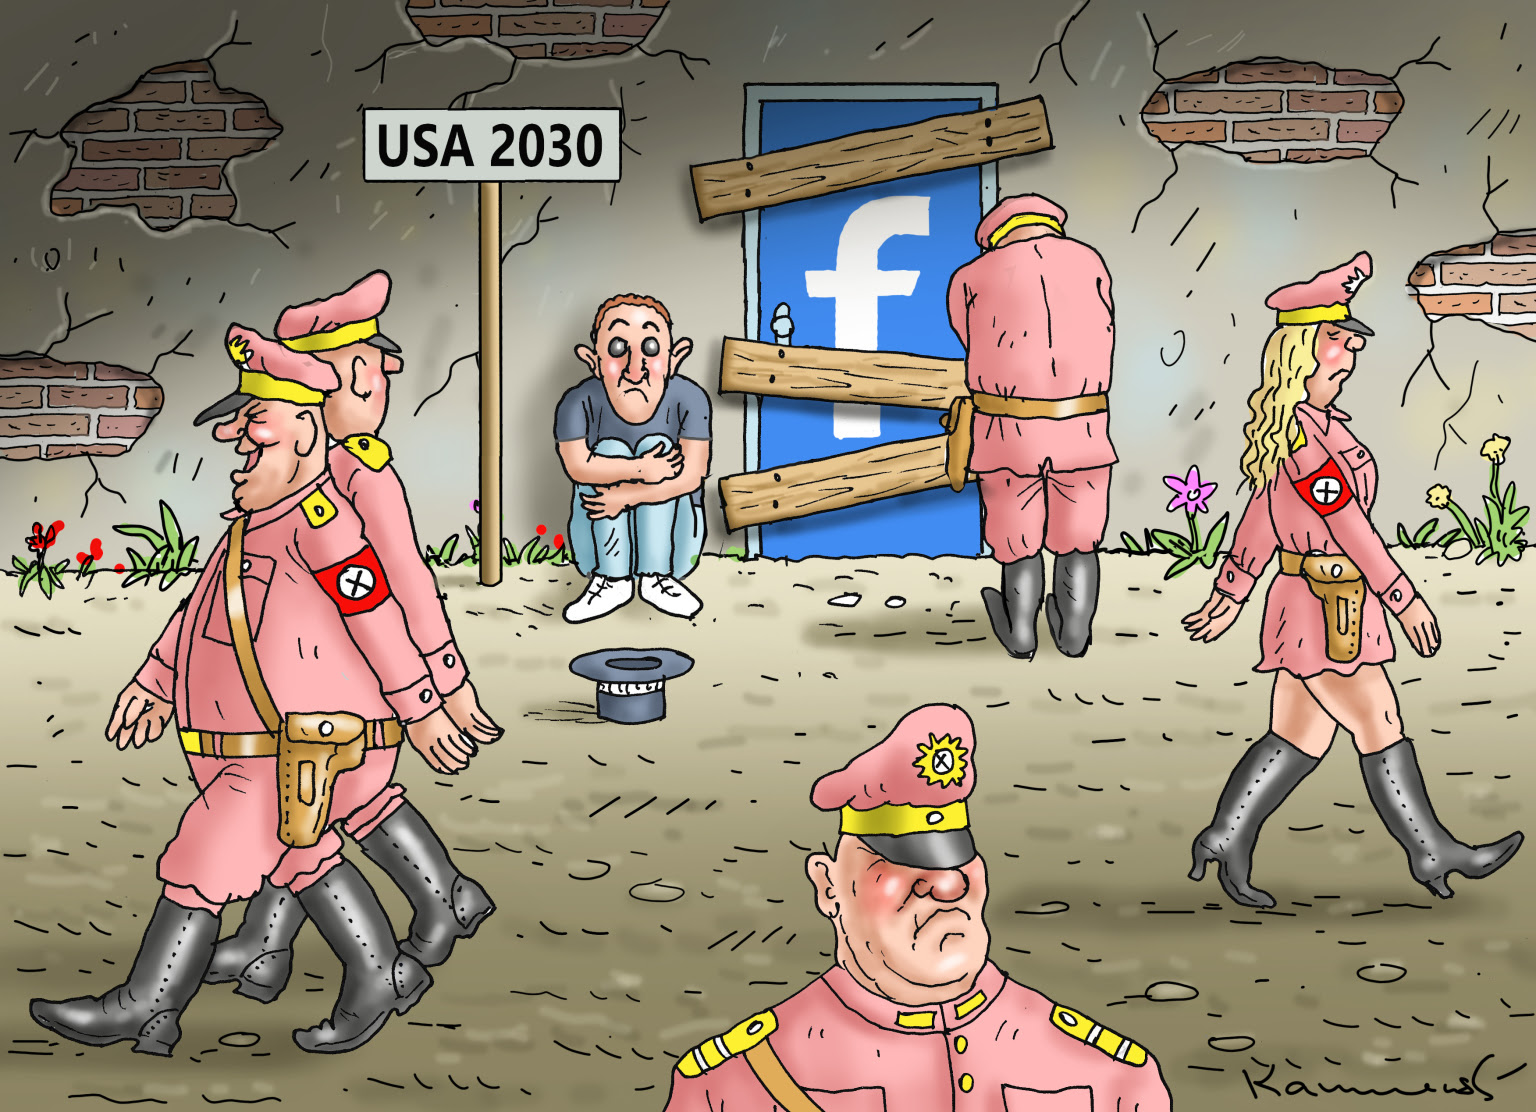 Facebook suppresses free speech while sowing division in civil society.